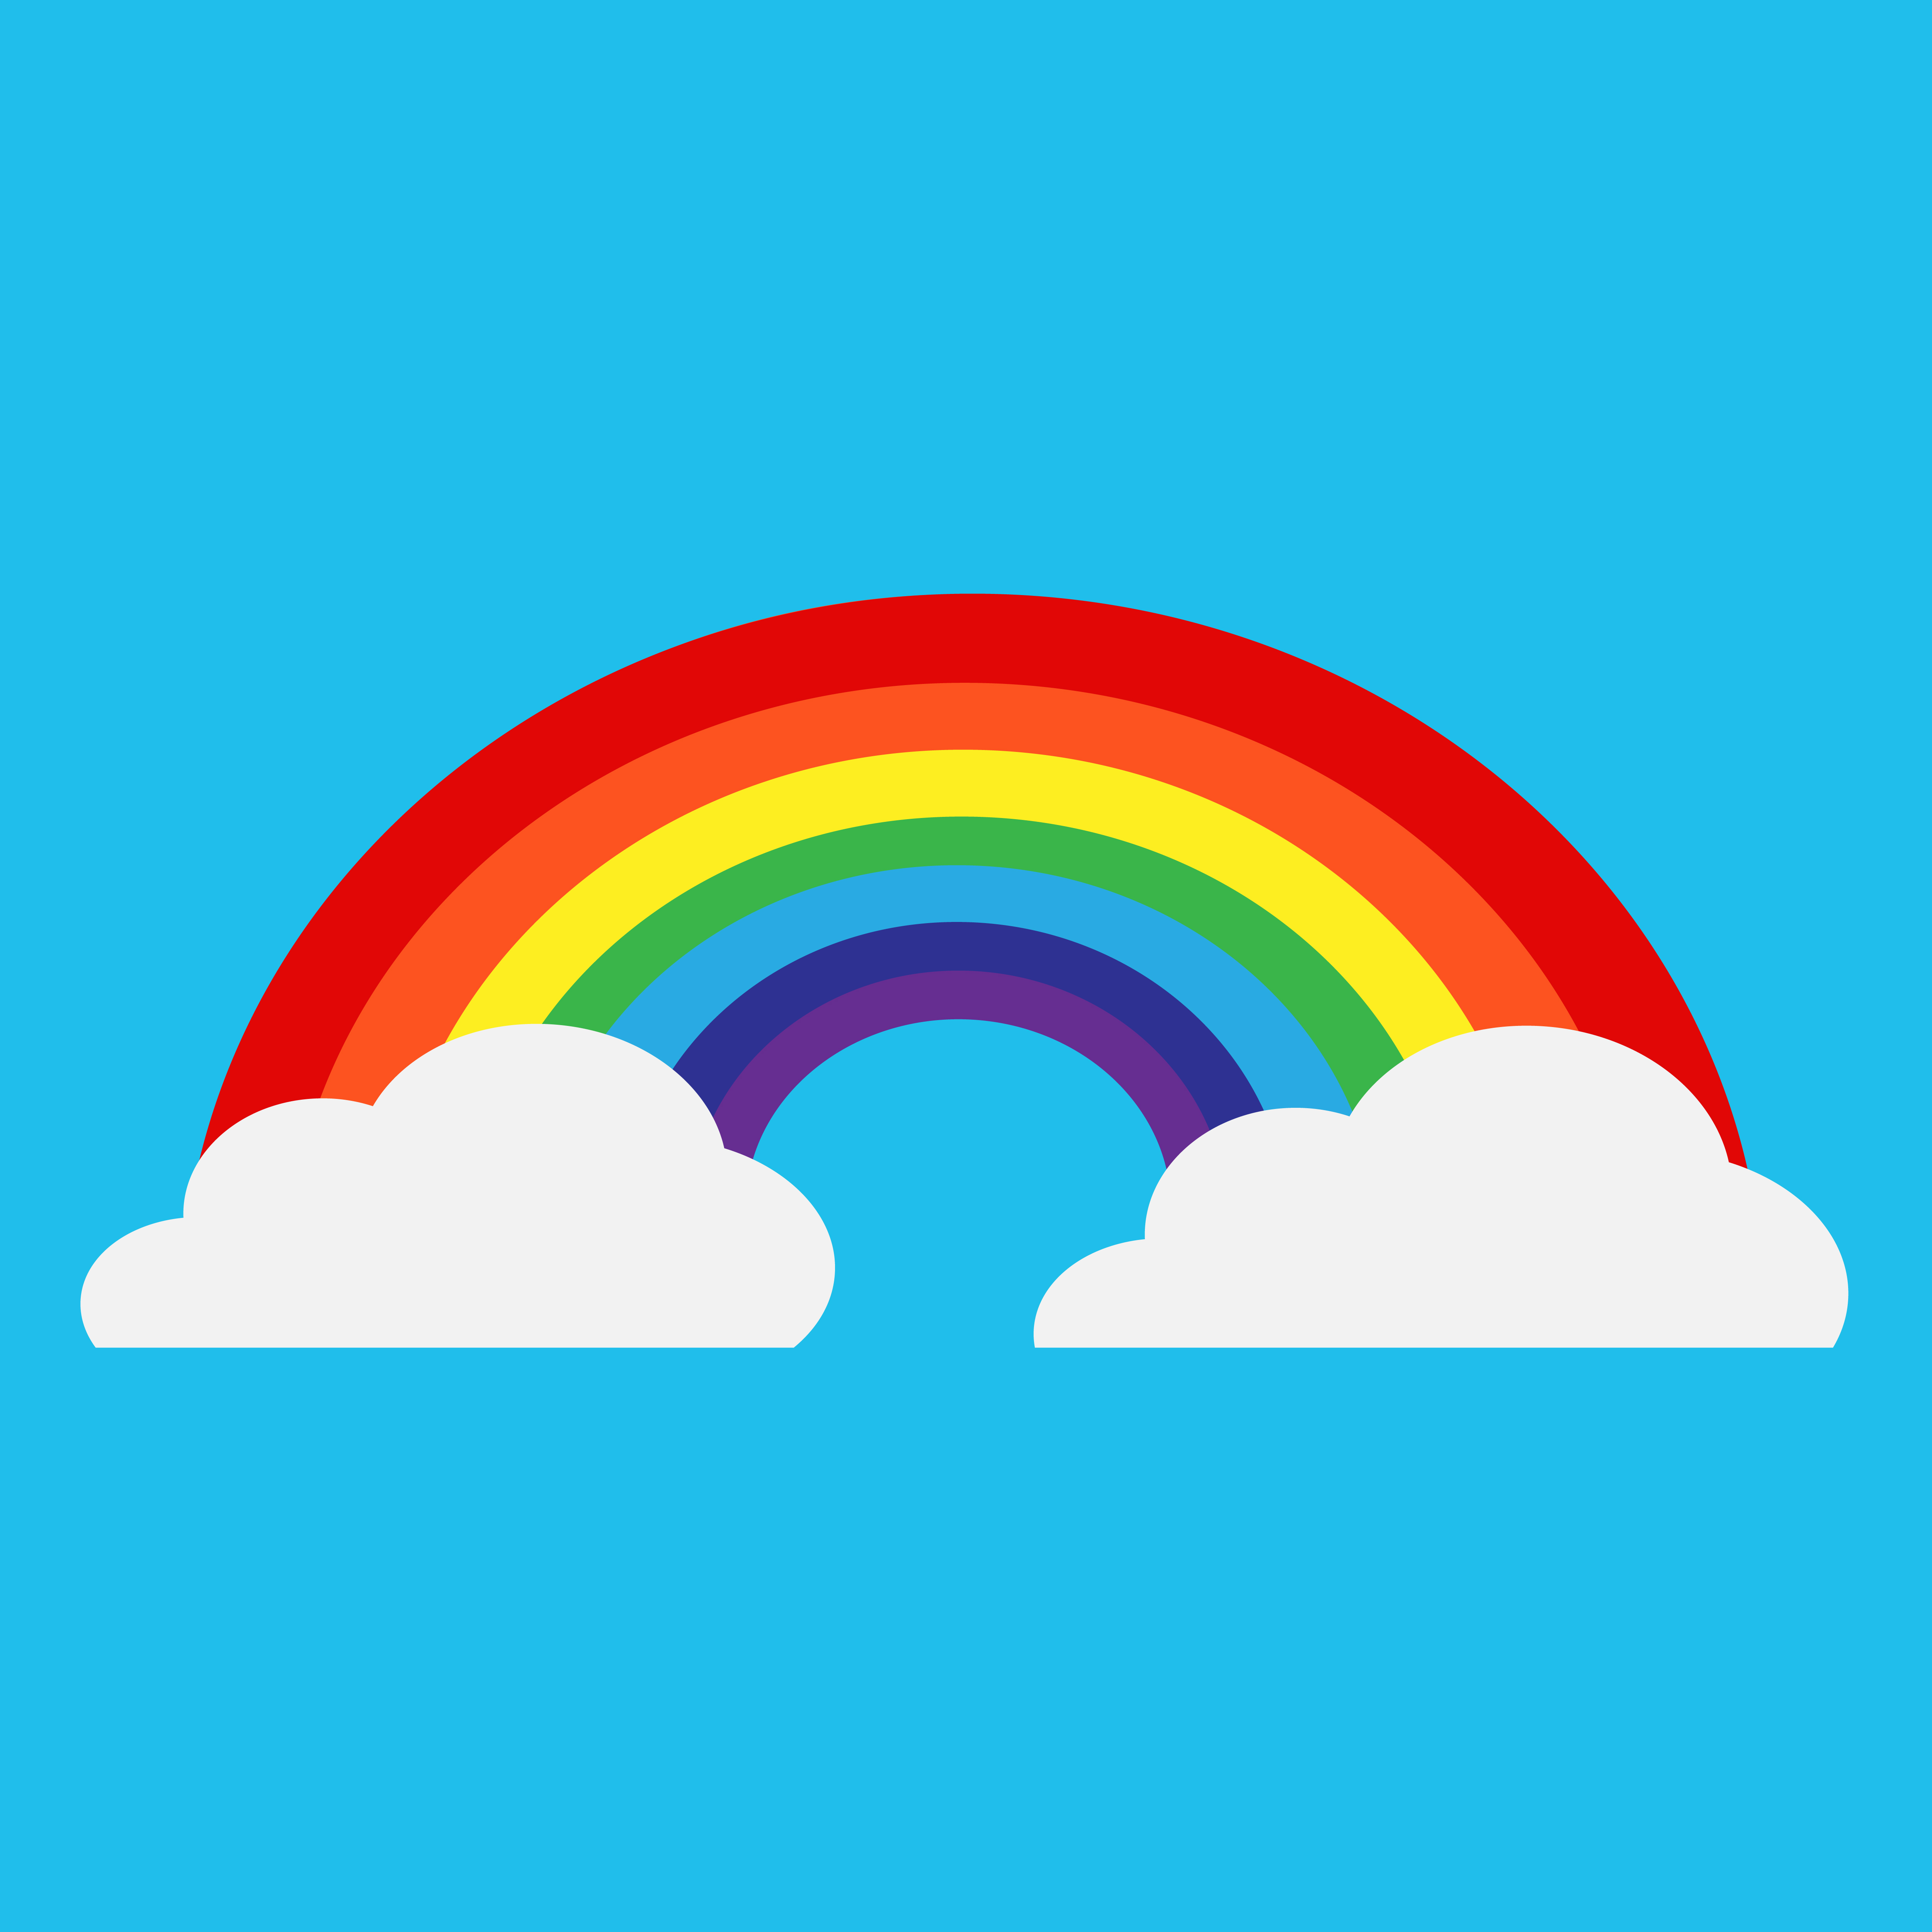 Download rainbow with cloud icon - Download Free Vectors, Clipart ...